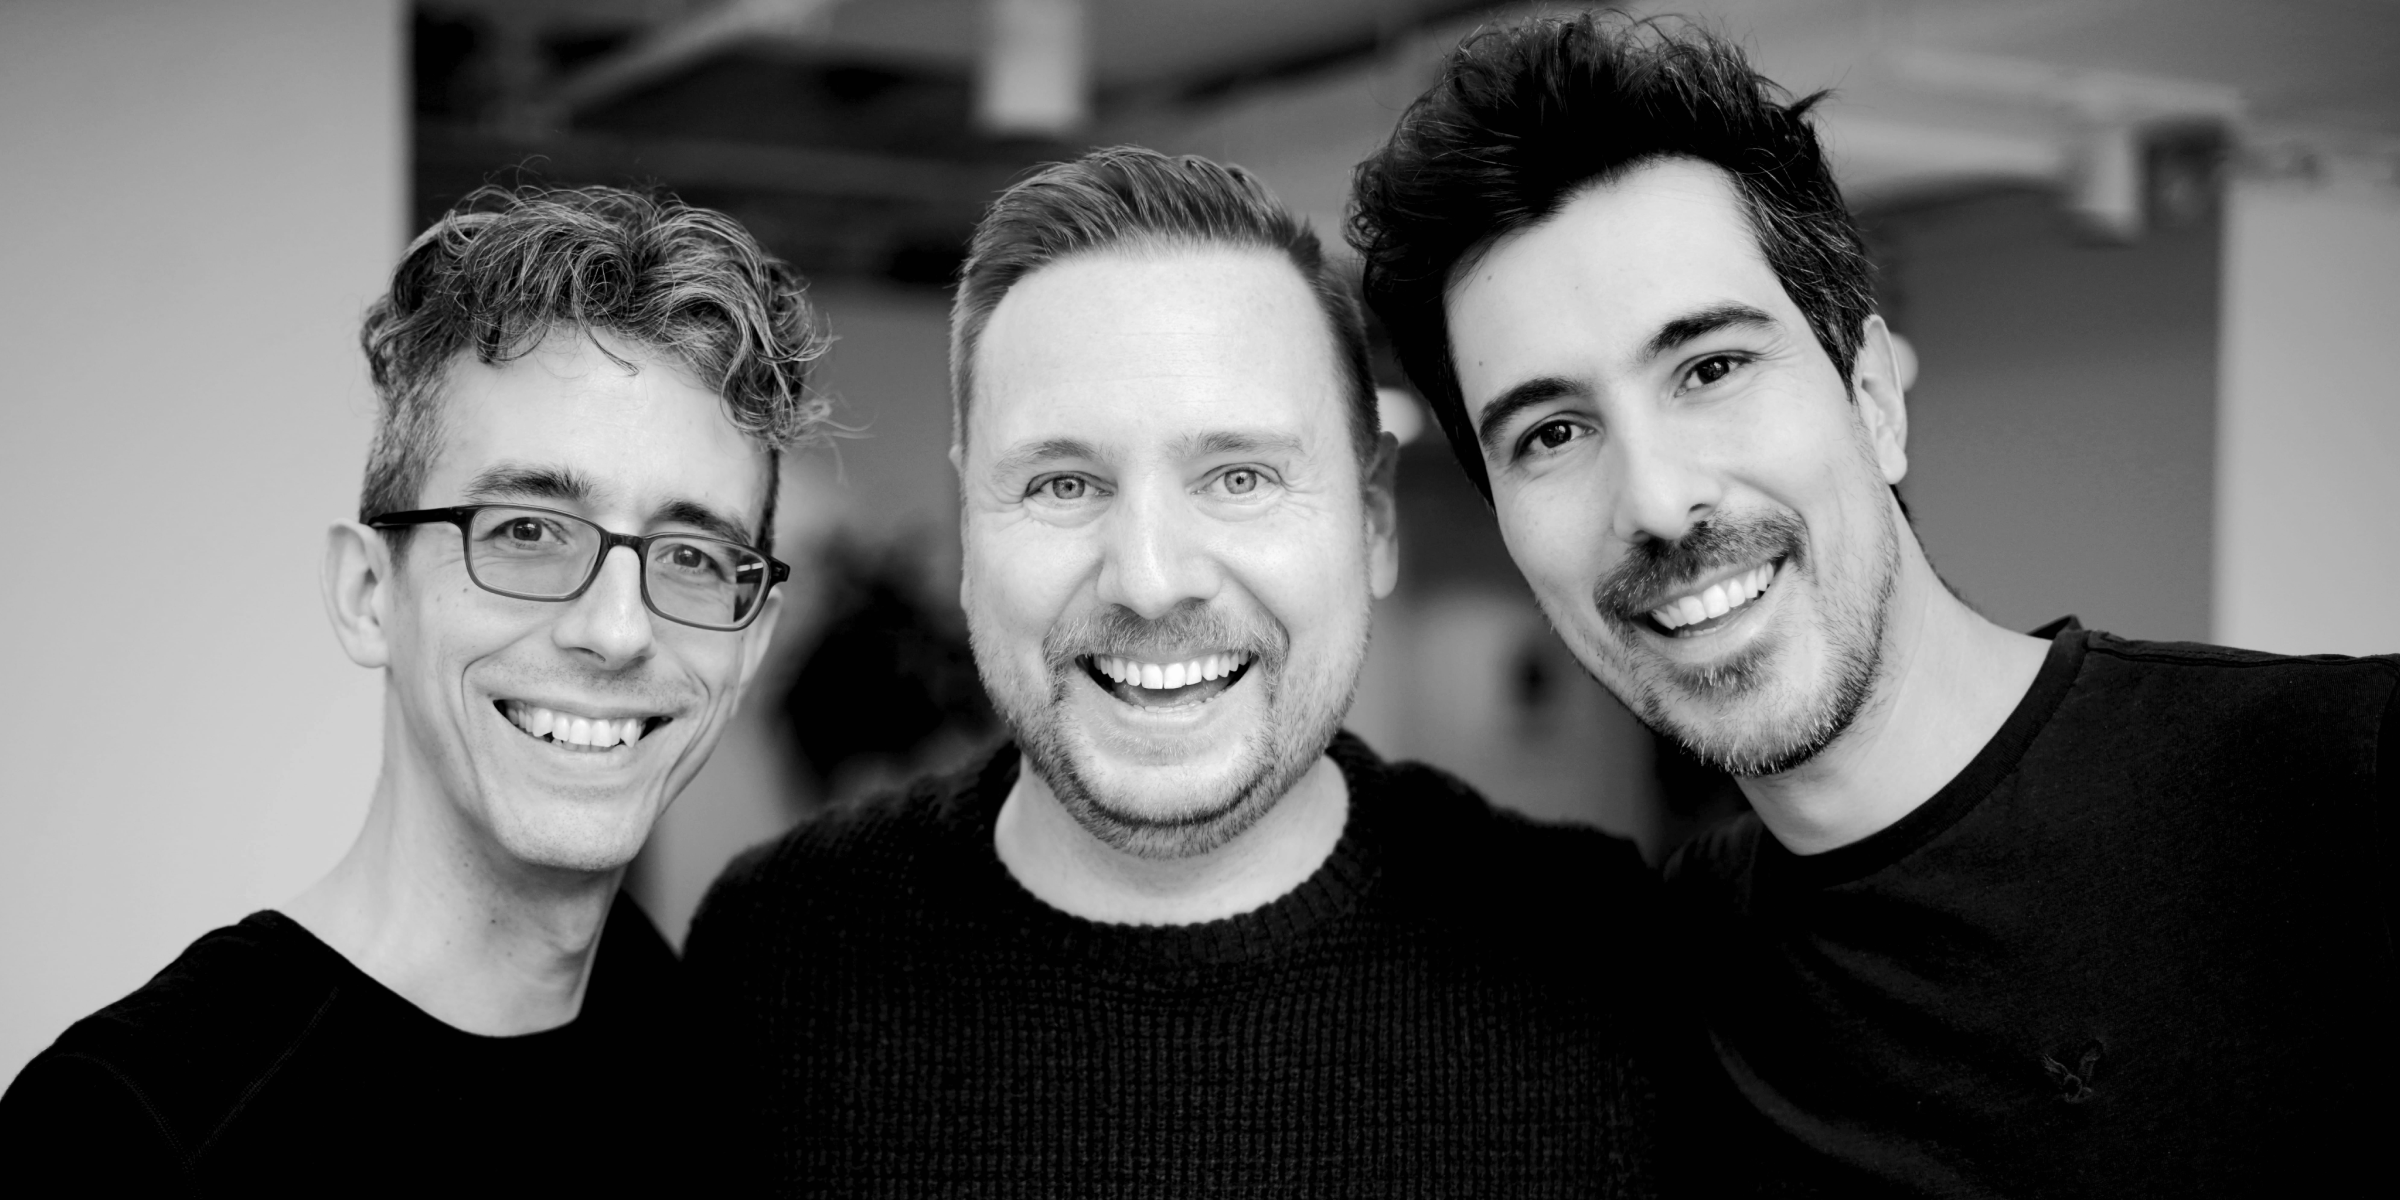 The founding team, from left to right: Isaac Z. Schlueter, Darcy Clarke and Ruy Adorno